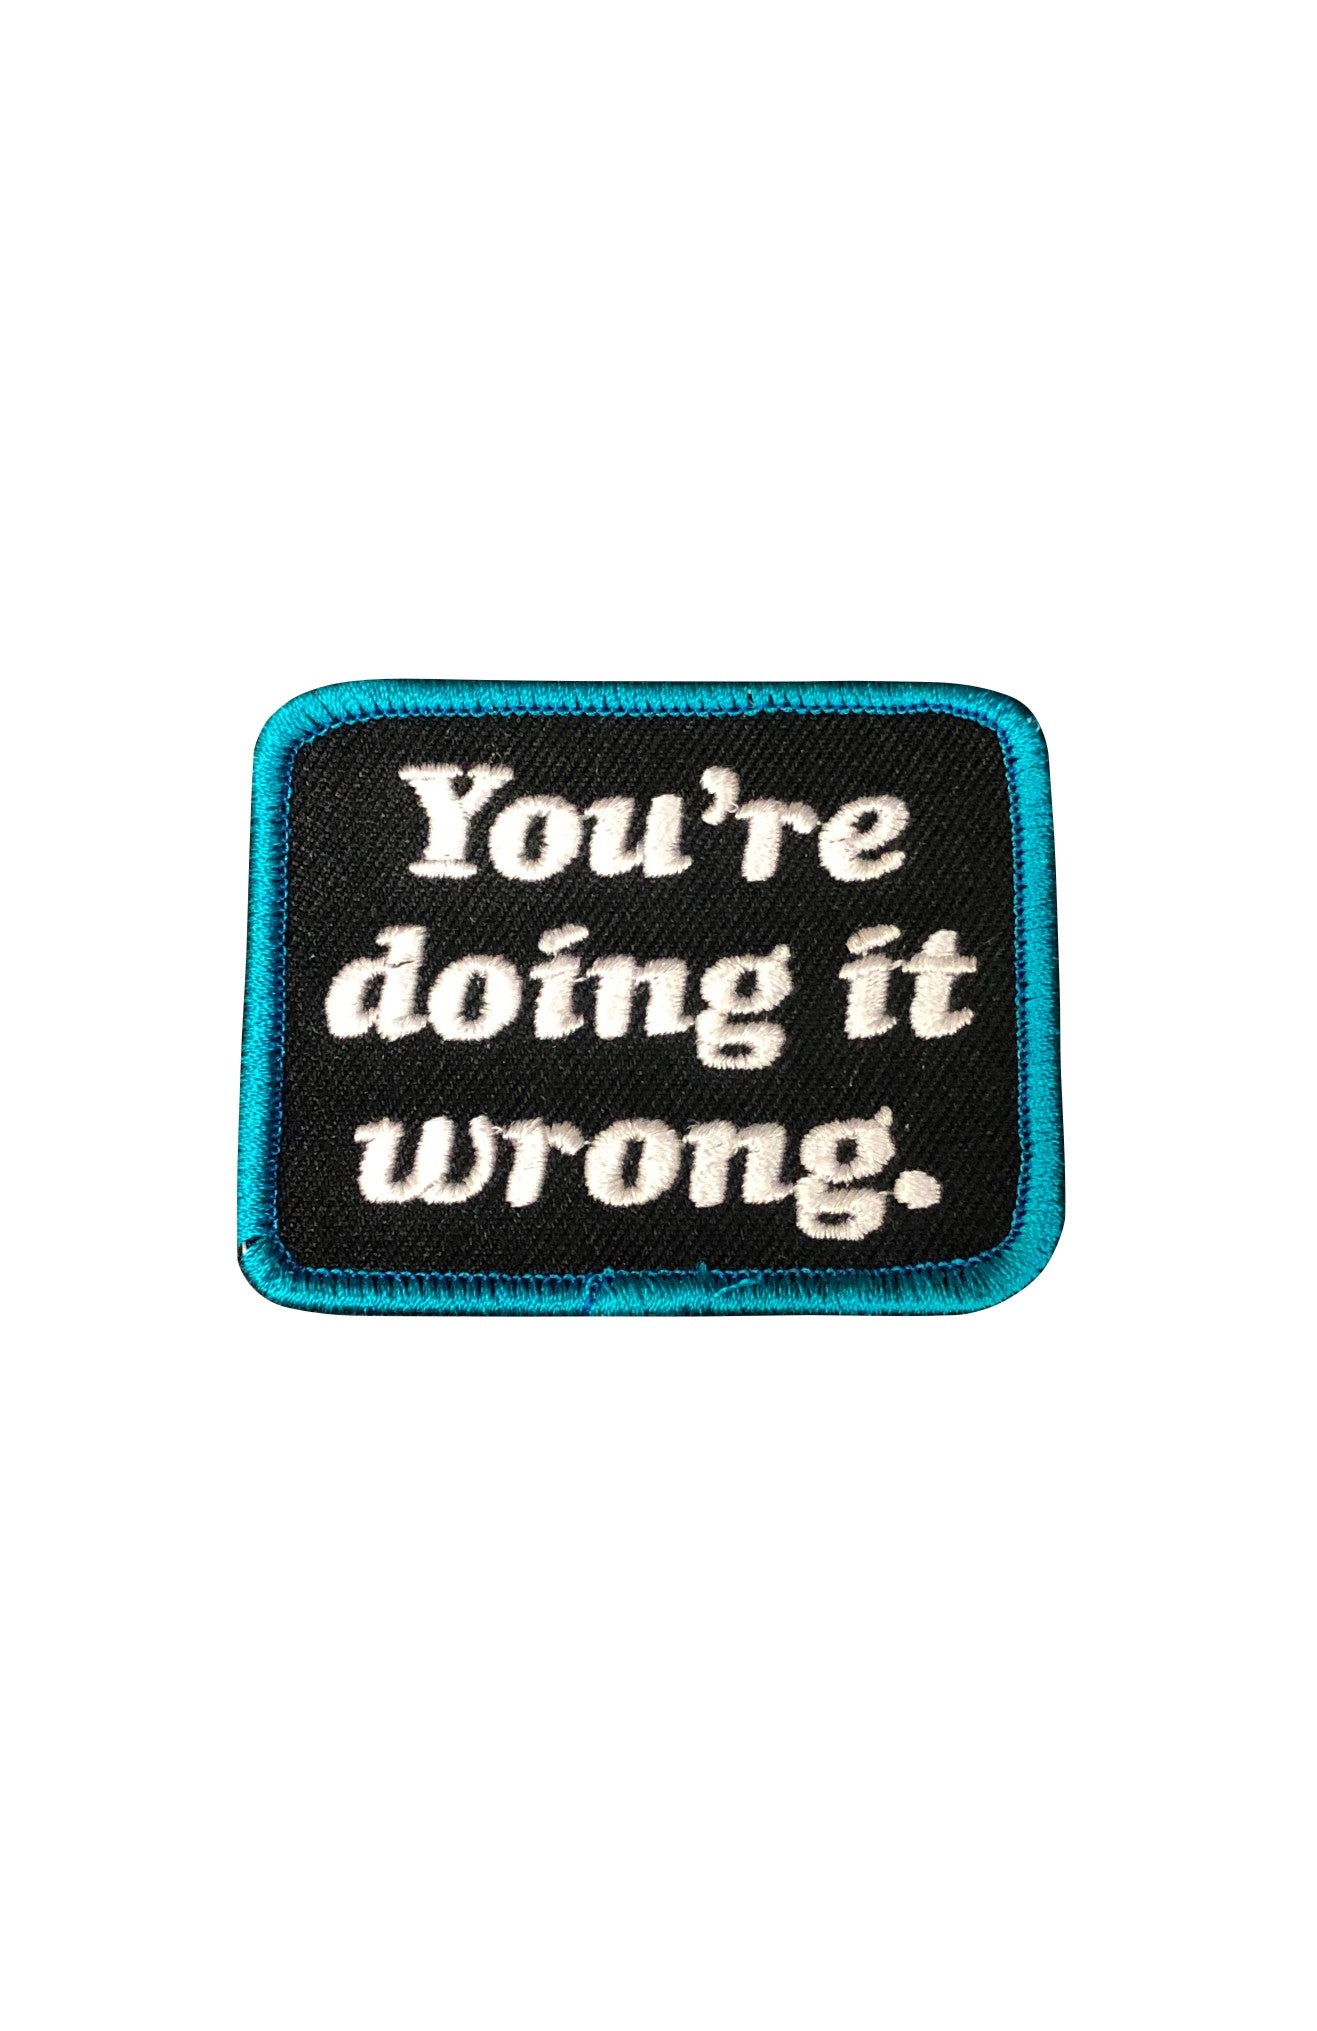 "You're Doing it wrong." Patch by Grubwear